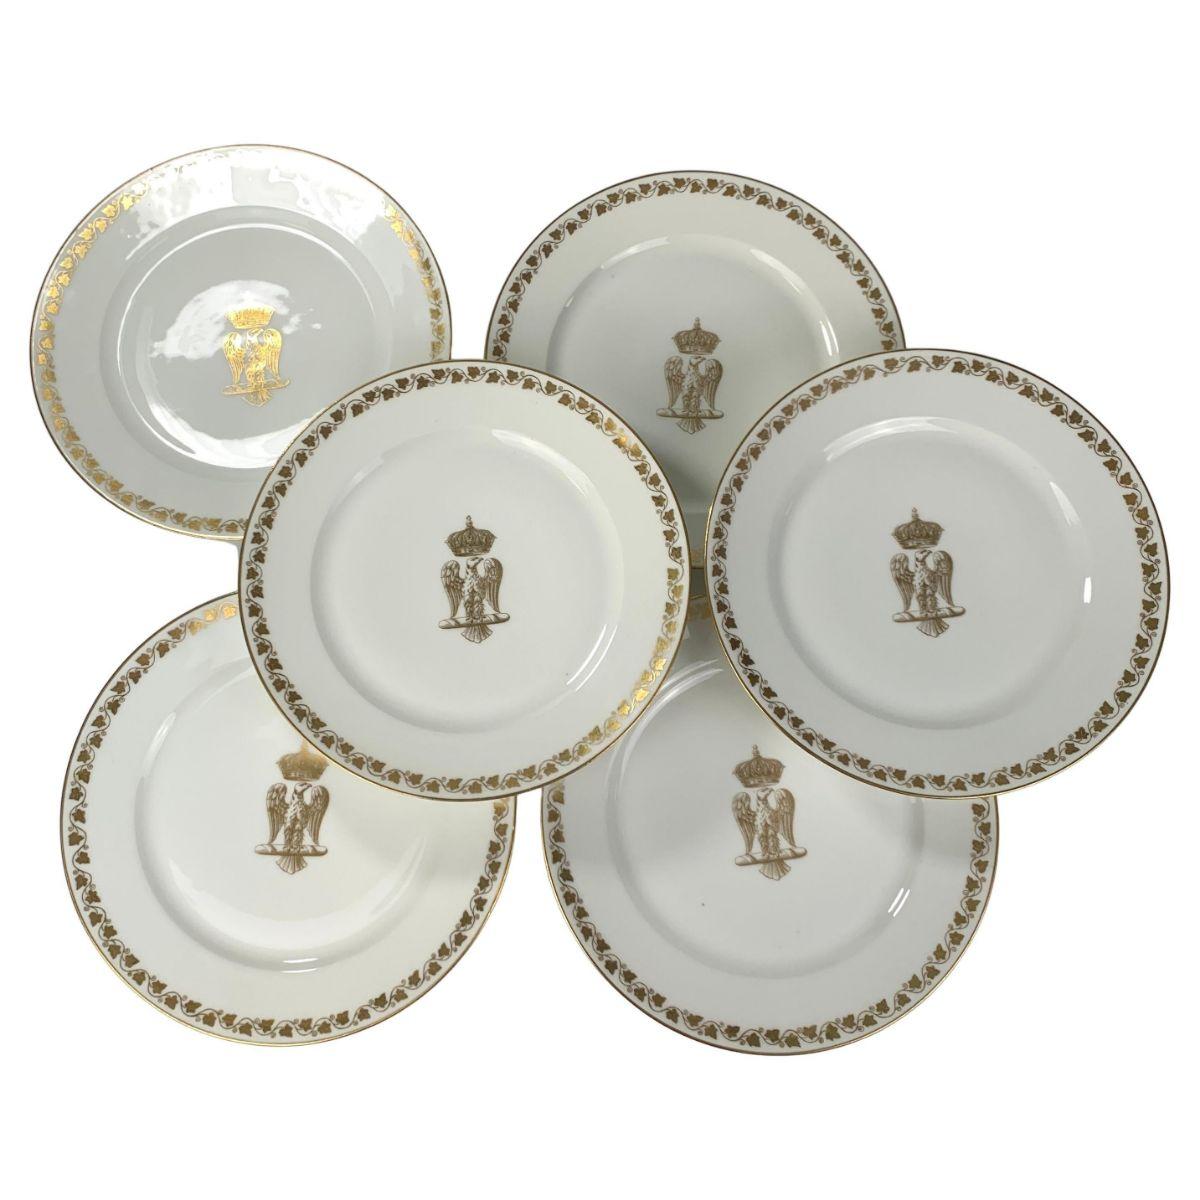 This set of six dinner plates features the Napoleonic Imperial Eagle below a crown. Made in the Sevres style in France in the 19th-century they are painted in gilt.
The borders are decorated with grape leaves on the vine.
The Imperial Eagle was